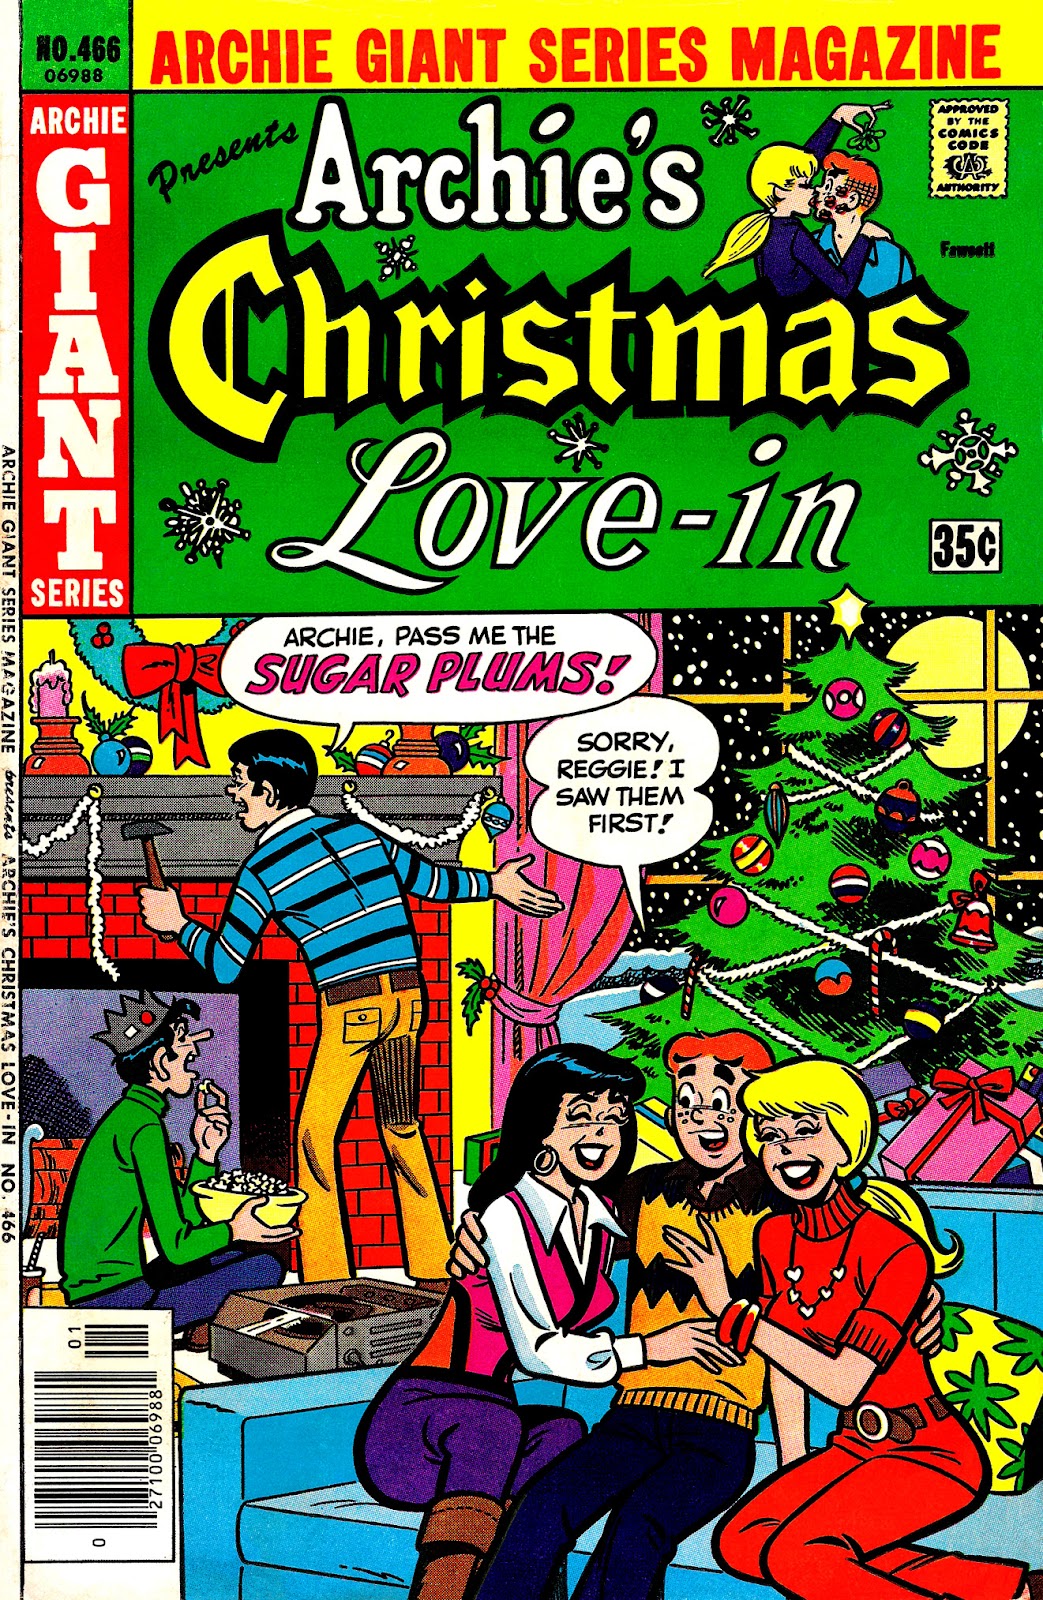 Archie Giant Series Magazine 466 Page 1